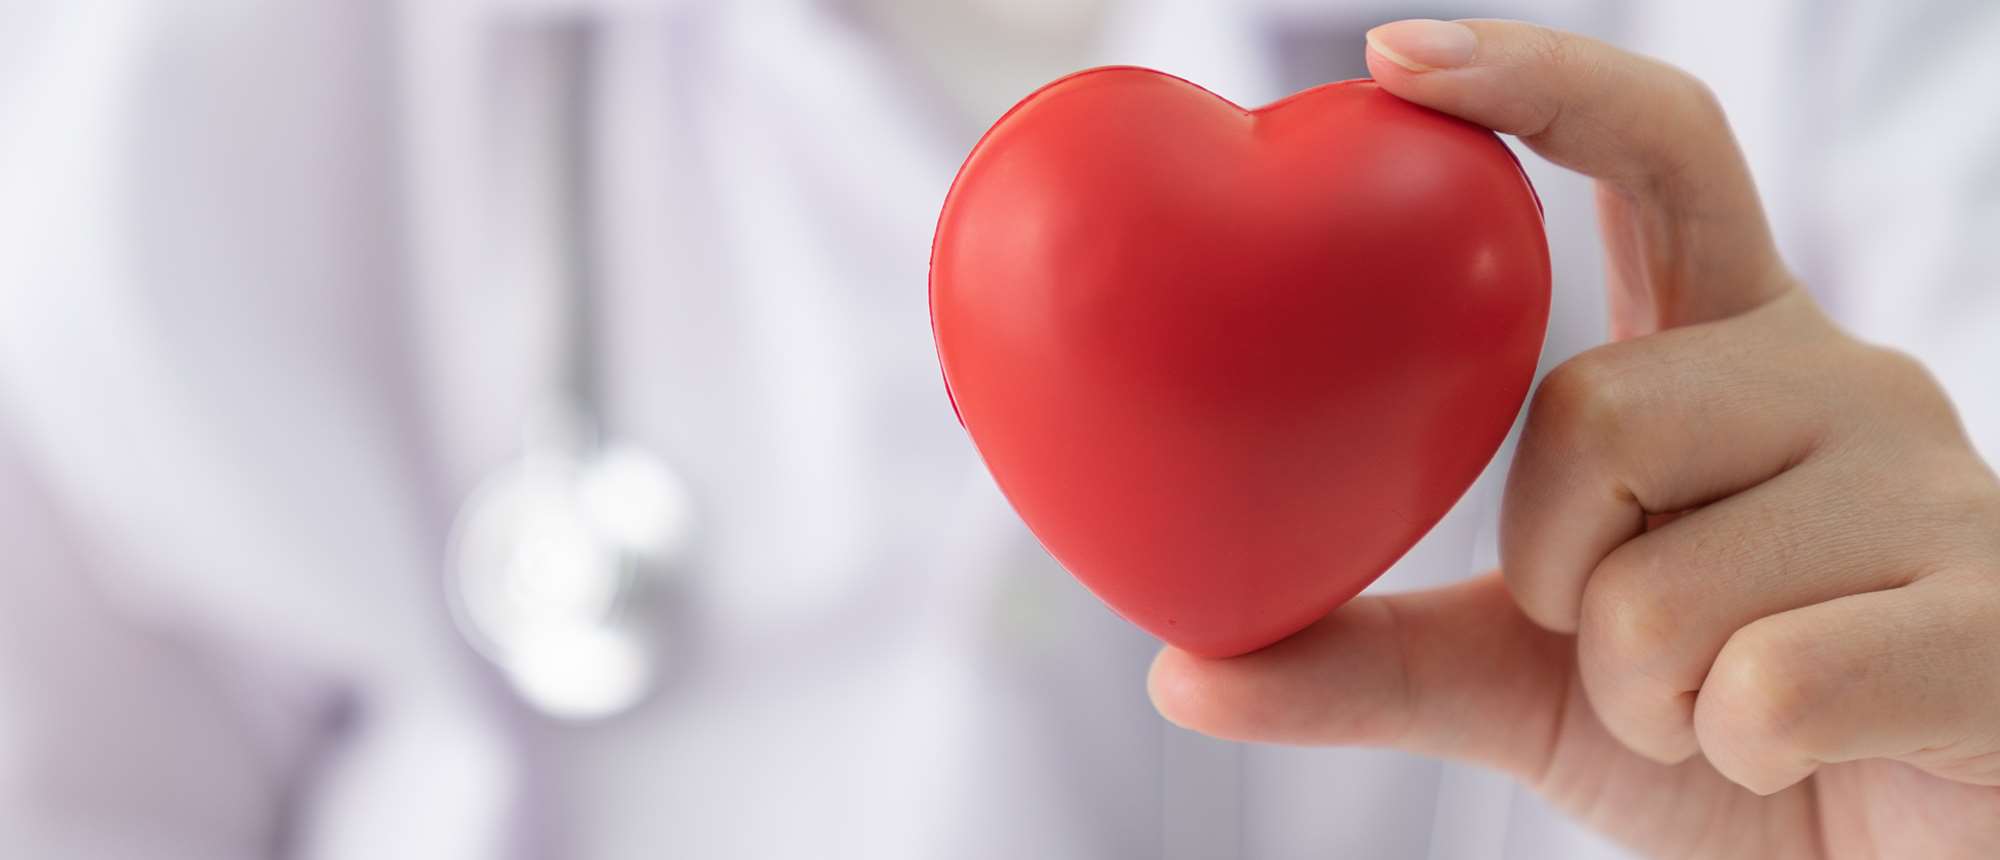 How To Check Heart Health